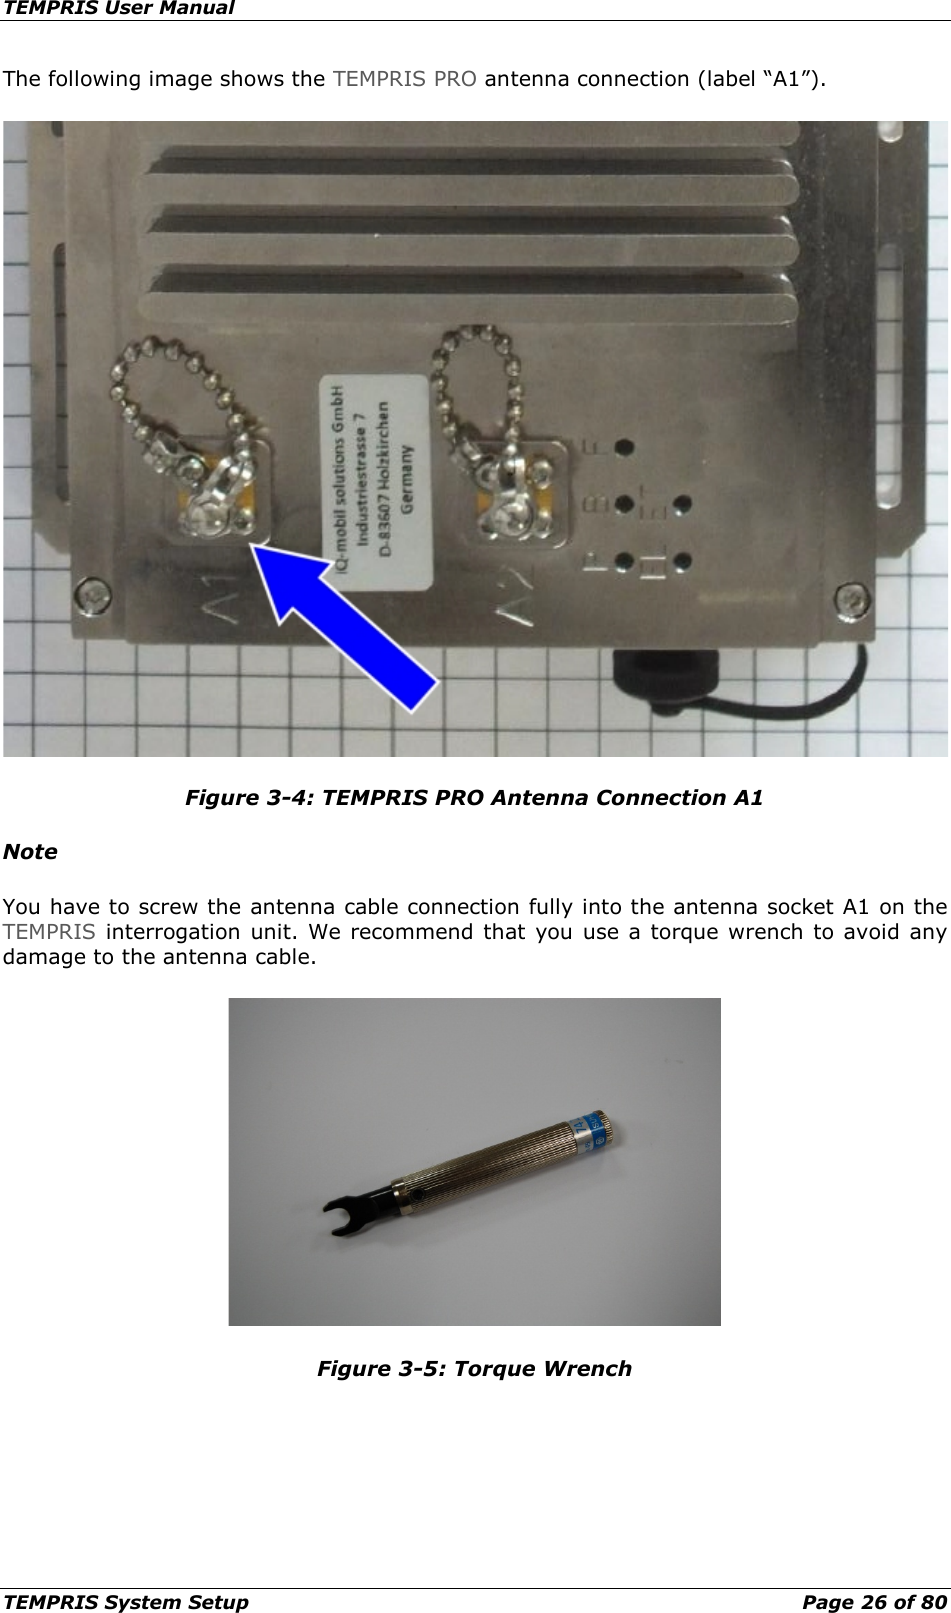 TEMPRIS User Manual TEMPRIS System Setup    Page 26 of 80 The following image shows the TEMPRIS PRO antenna connection (label “A1”).  Figure 3-4: TEMPRIS PRO Antenna Connection A1 Note You have to screw the antenna cable connection fully into the antenna socket A1 on the TEMPRIS interrogation unit.  We recommend that you use a torque wrench to avoid any damage to the antenna cable.  Figure 3-5: Torque Wrench     